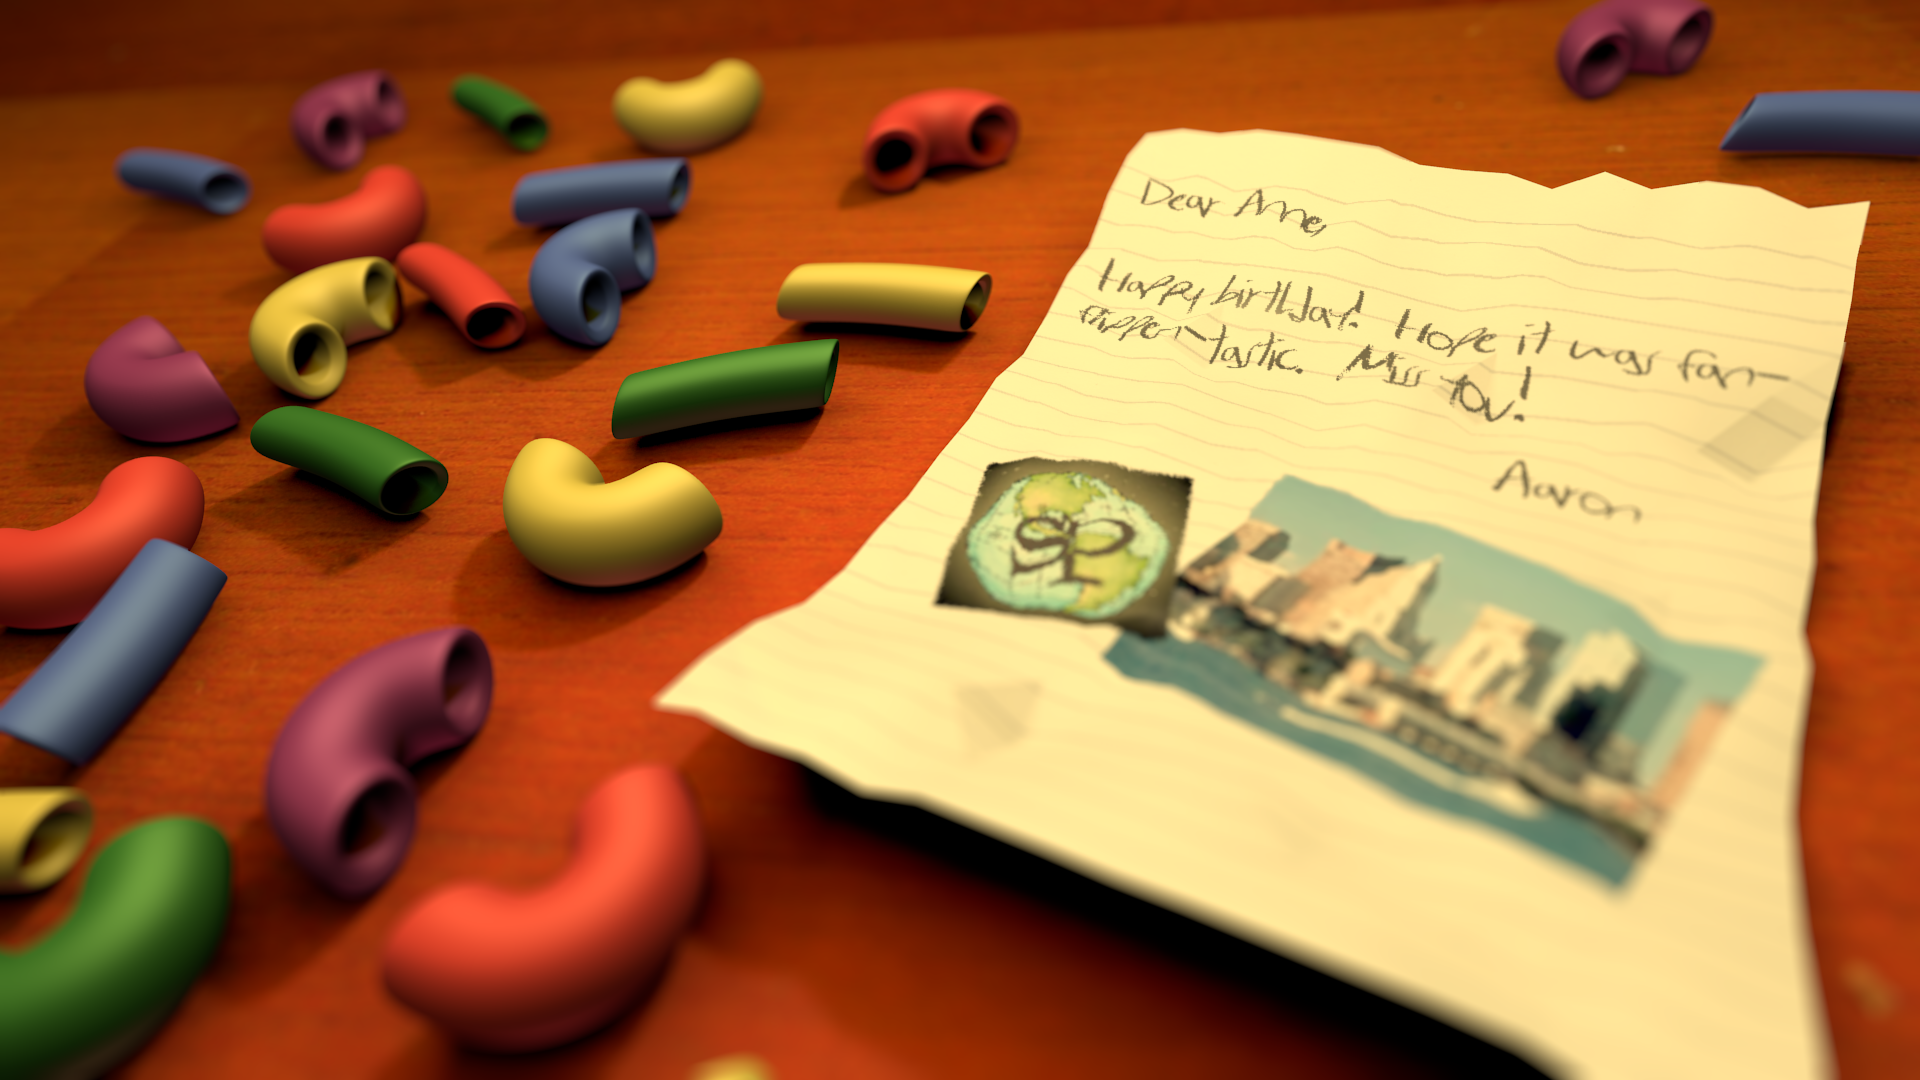 a 3D scene of a tabletop with macaroni-shaped toys and a letter on it.